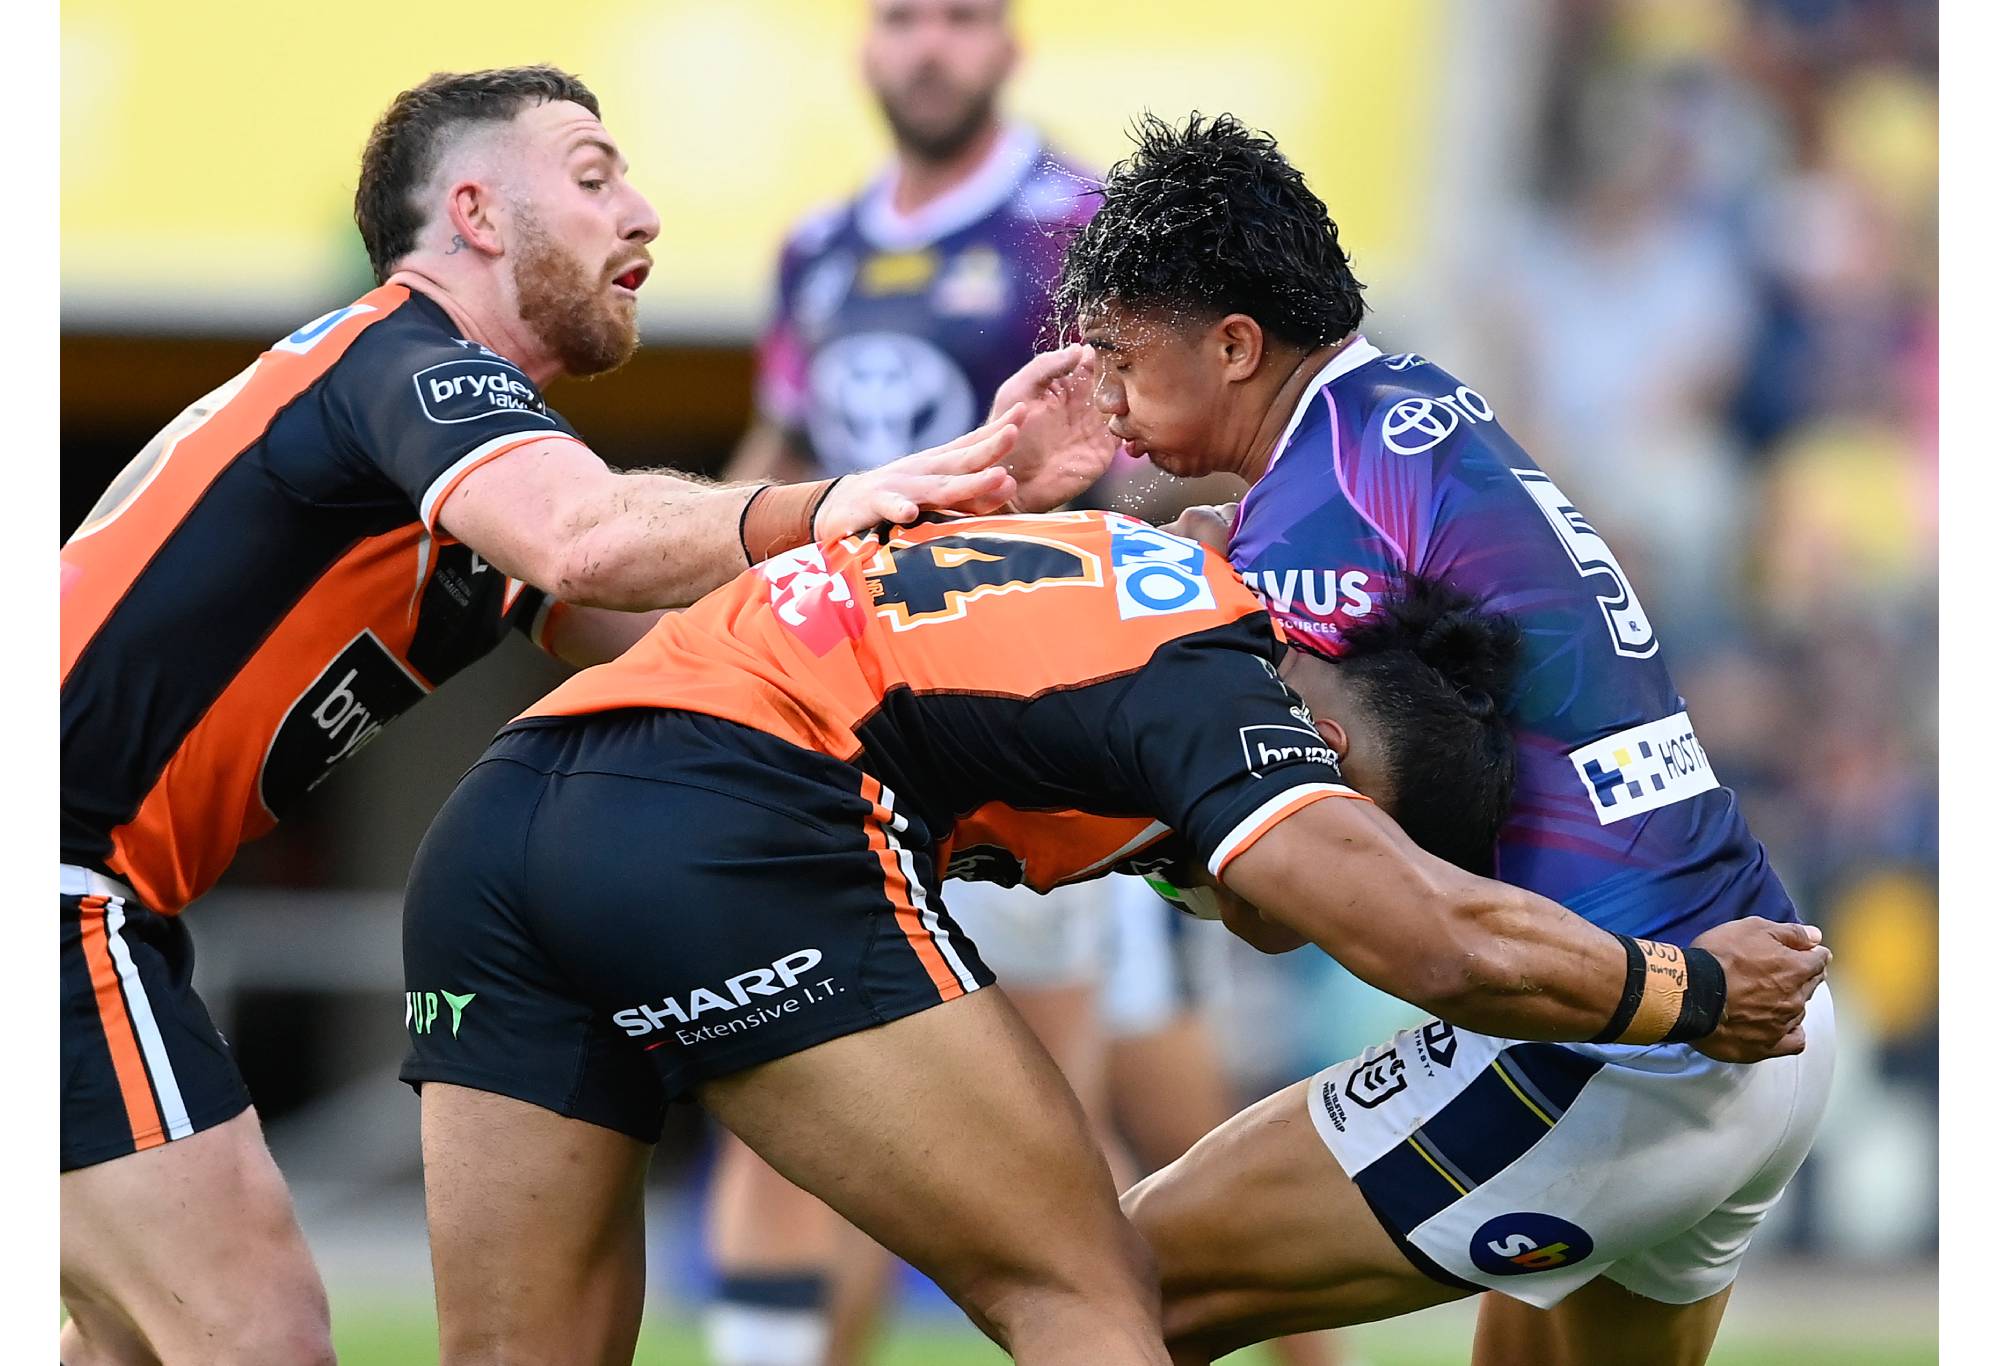 TOWNSVILLE, AUSTRALIA - JULY 24: Murray Taulagi of the Cowboys is tackled during the round 19 NRL match between the North Queensland Cowboys and the Wests Tigers at Qld Country Bank Stadium, on July 24, 2022, in Townsville, Australia. (Photo by Ian Hitchcock/Getty Images)